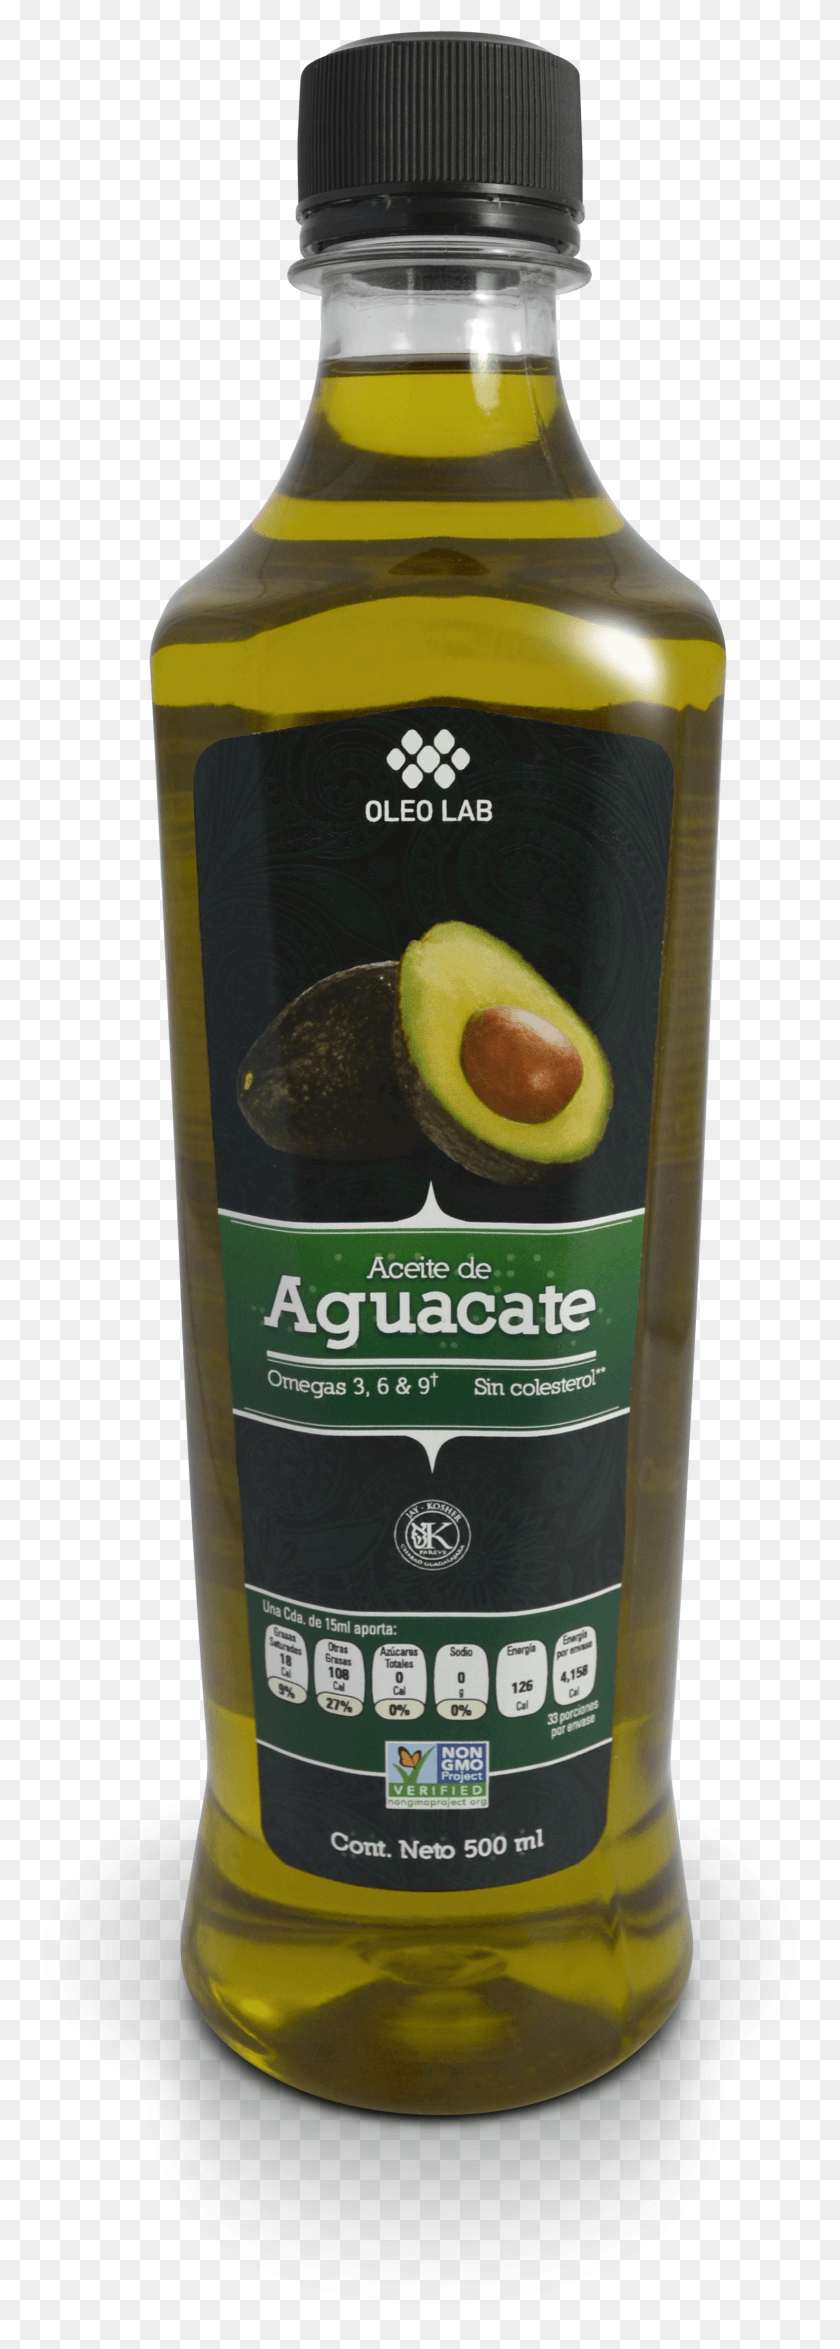 1478x4339 Oleolab Aceite Aguacate 500Ml Aceite De Aguacate Extra Virgen Hd Png